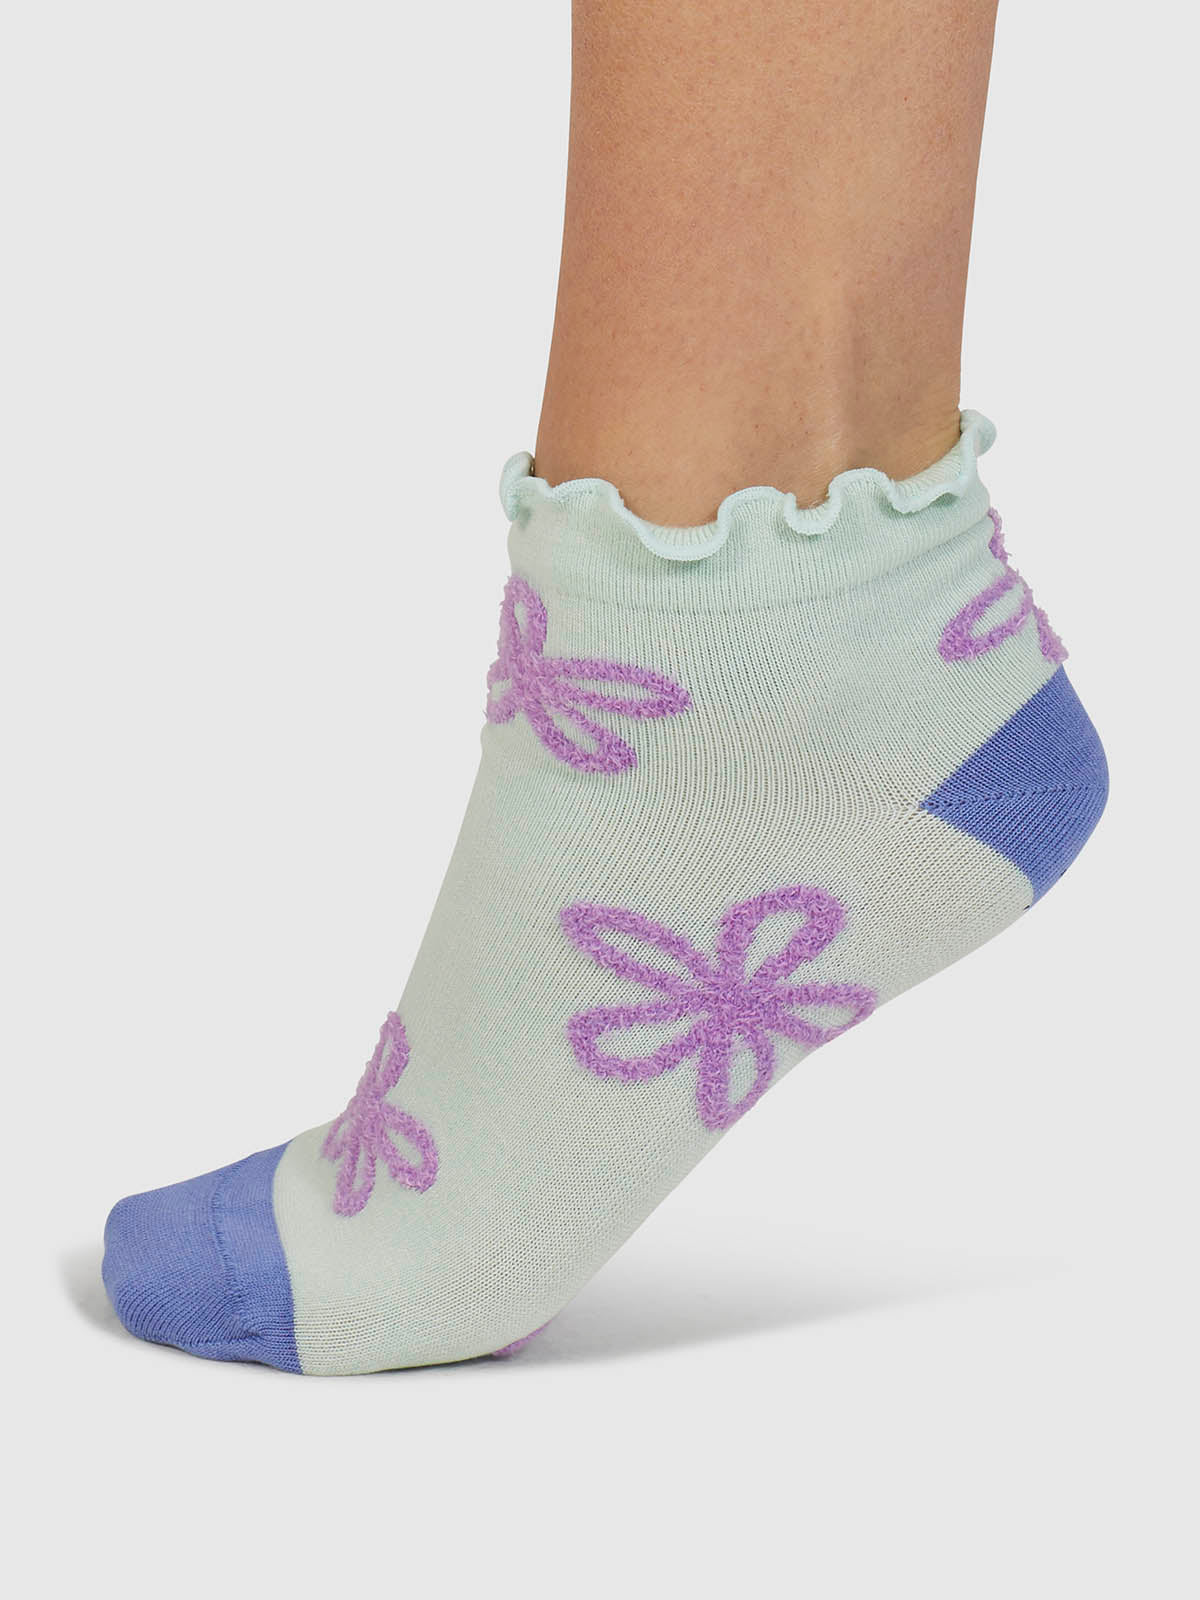 Daisee Textured Flower Bamboo Ankle Socks - Spearmint Green